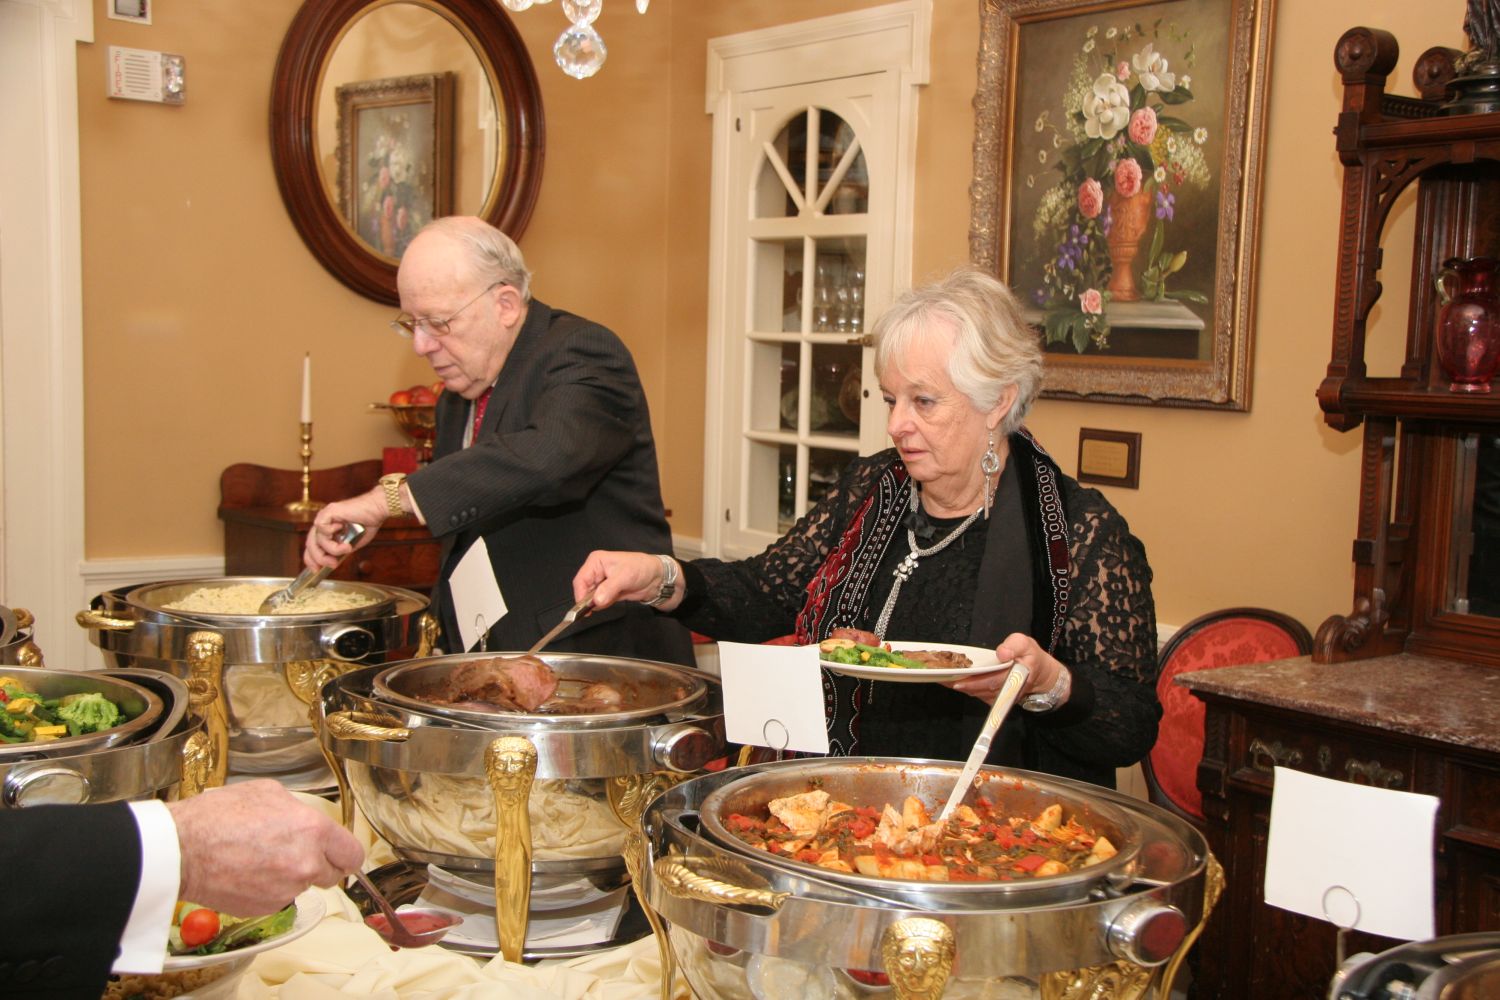 Steve and Esther sample the buffet